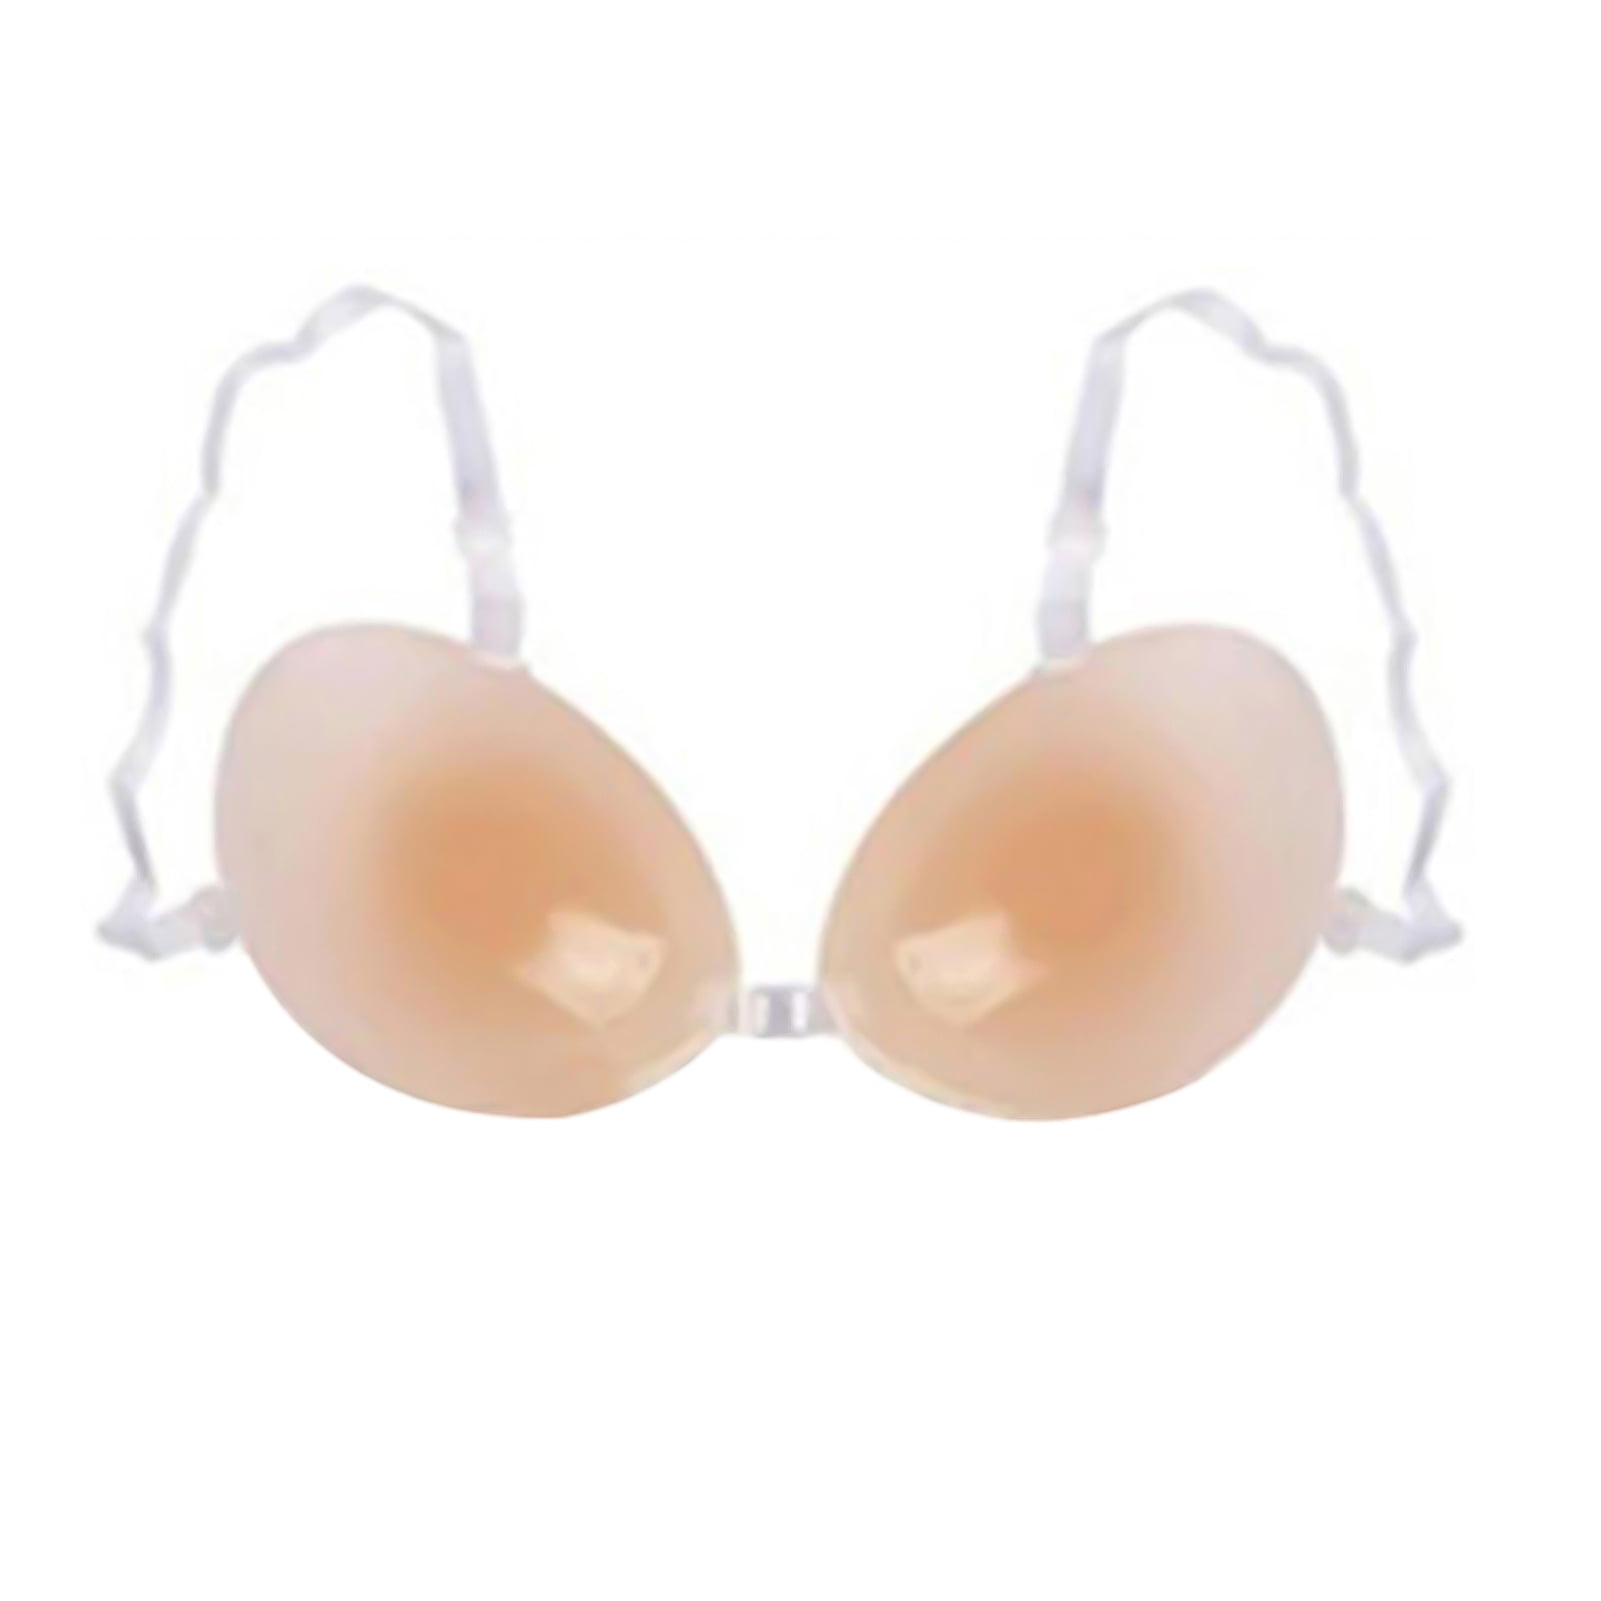 BIMEI See Through Bra CD Mastectomy Lingerie Bra Silicone Breast Forms  Prosthesis Pocket Bra with Steel Ring 9008,Beige,36D 